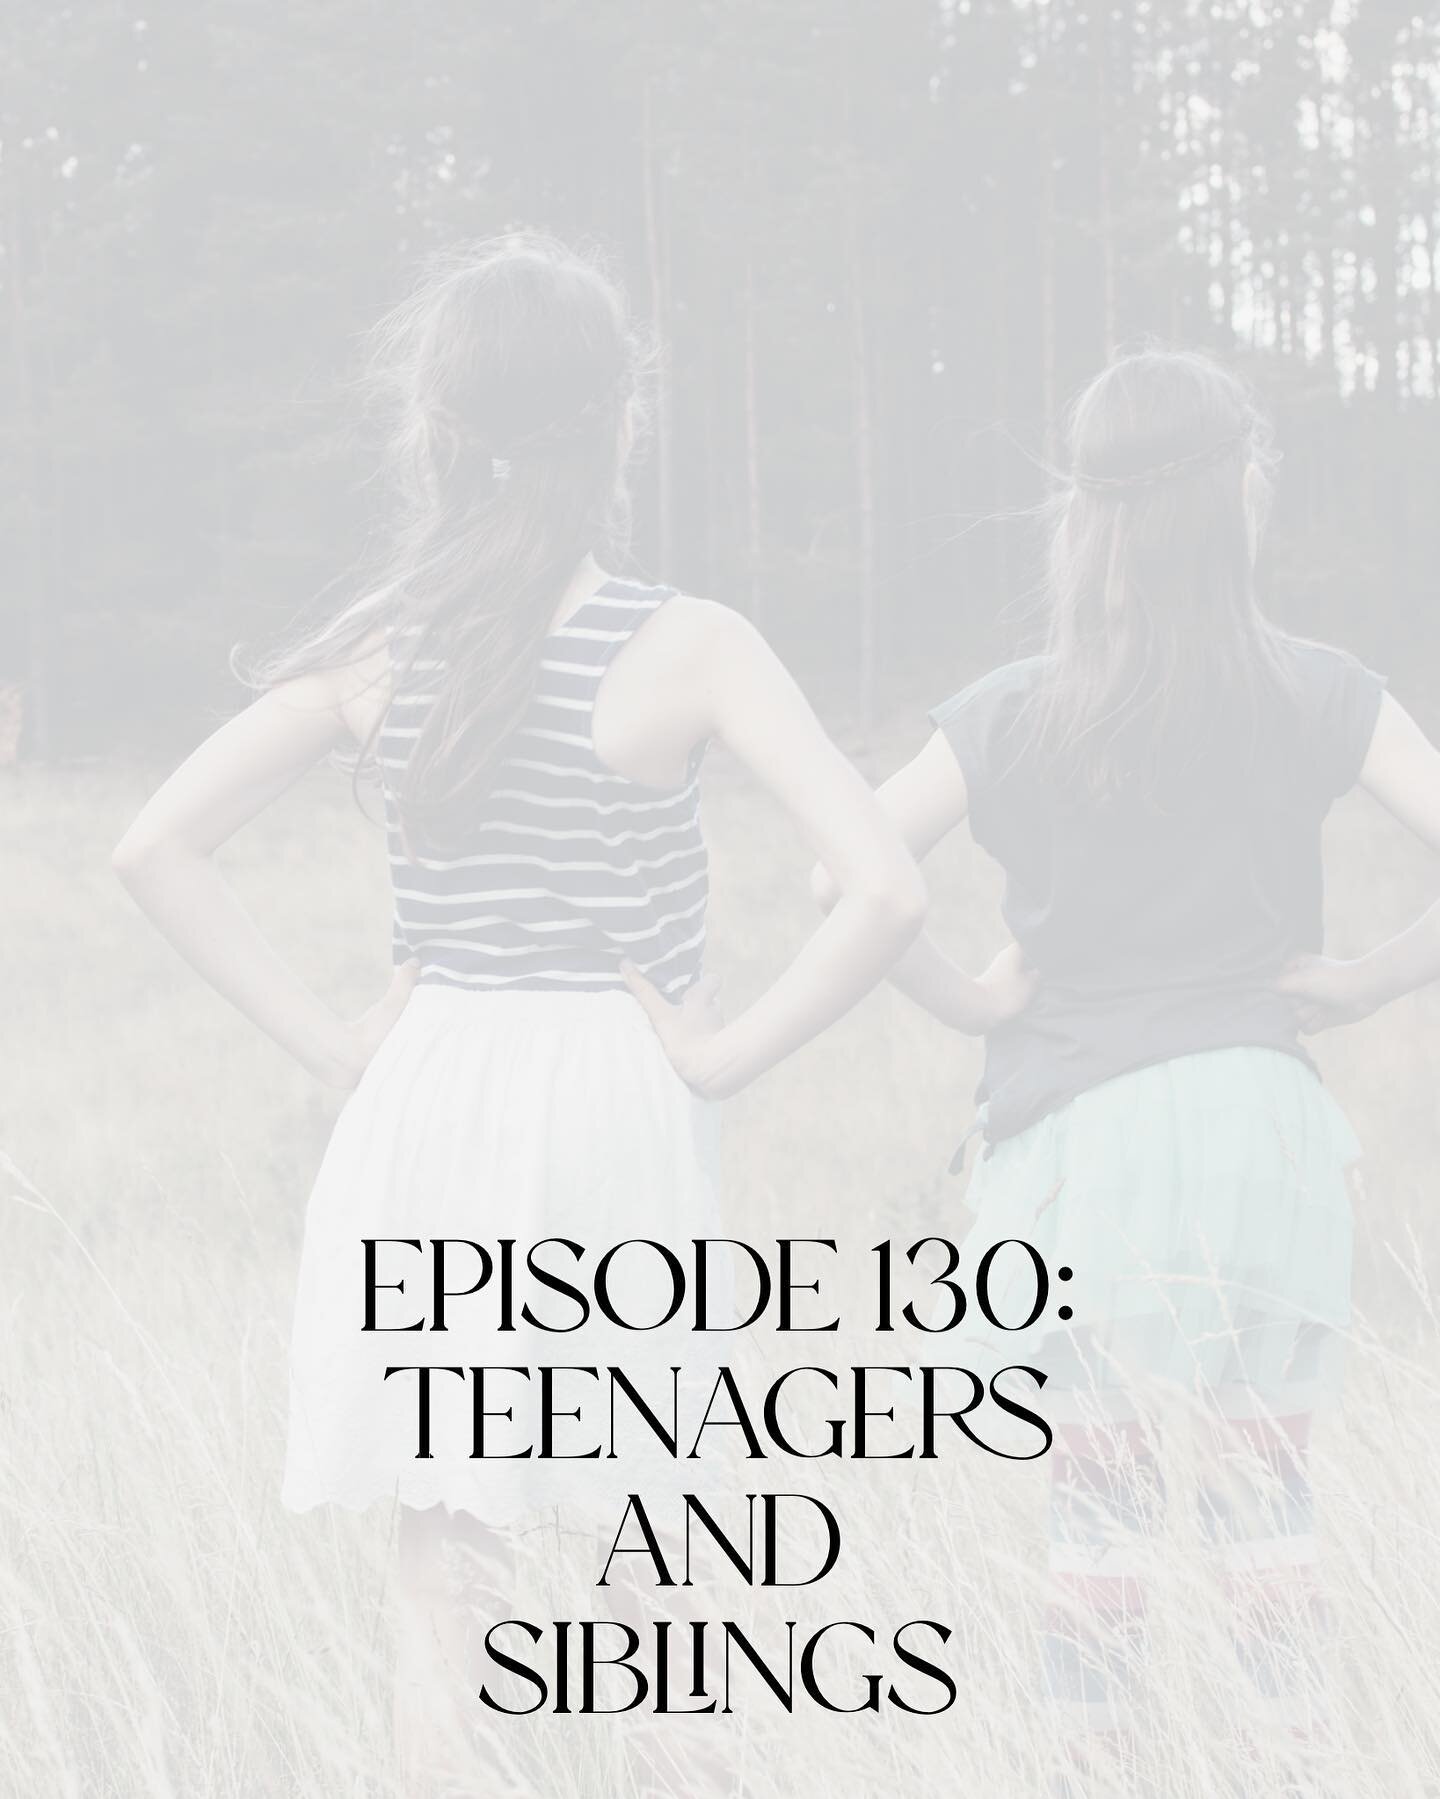 We've already talked about sibling rivalry (see episode 24) but today we talk about teenagers' relationships with siblings in general. How can parents cultivate good relationships between their children? What are ways that parents inadvertently disco